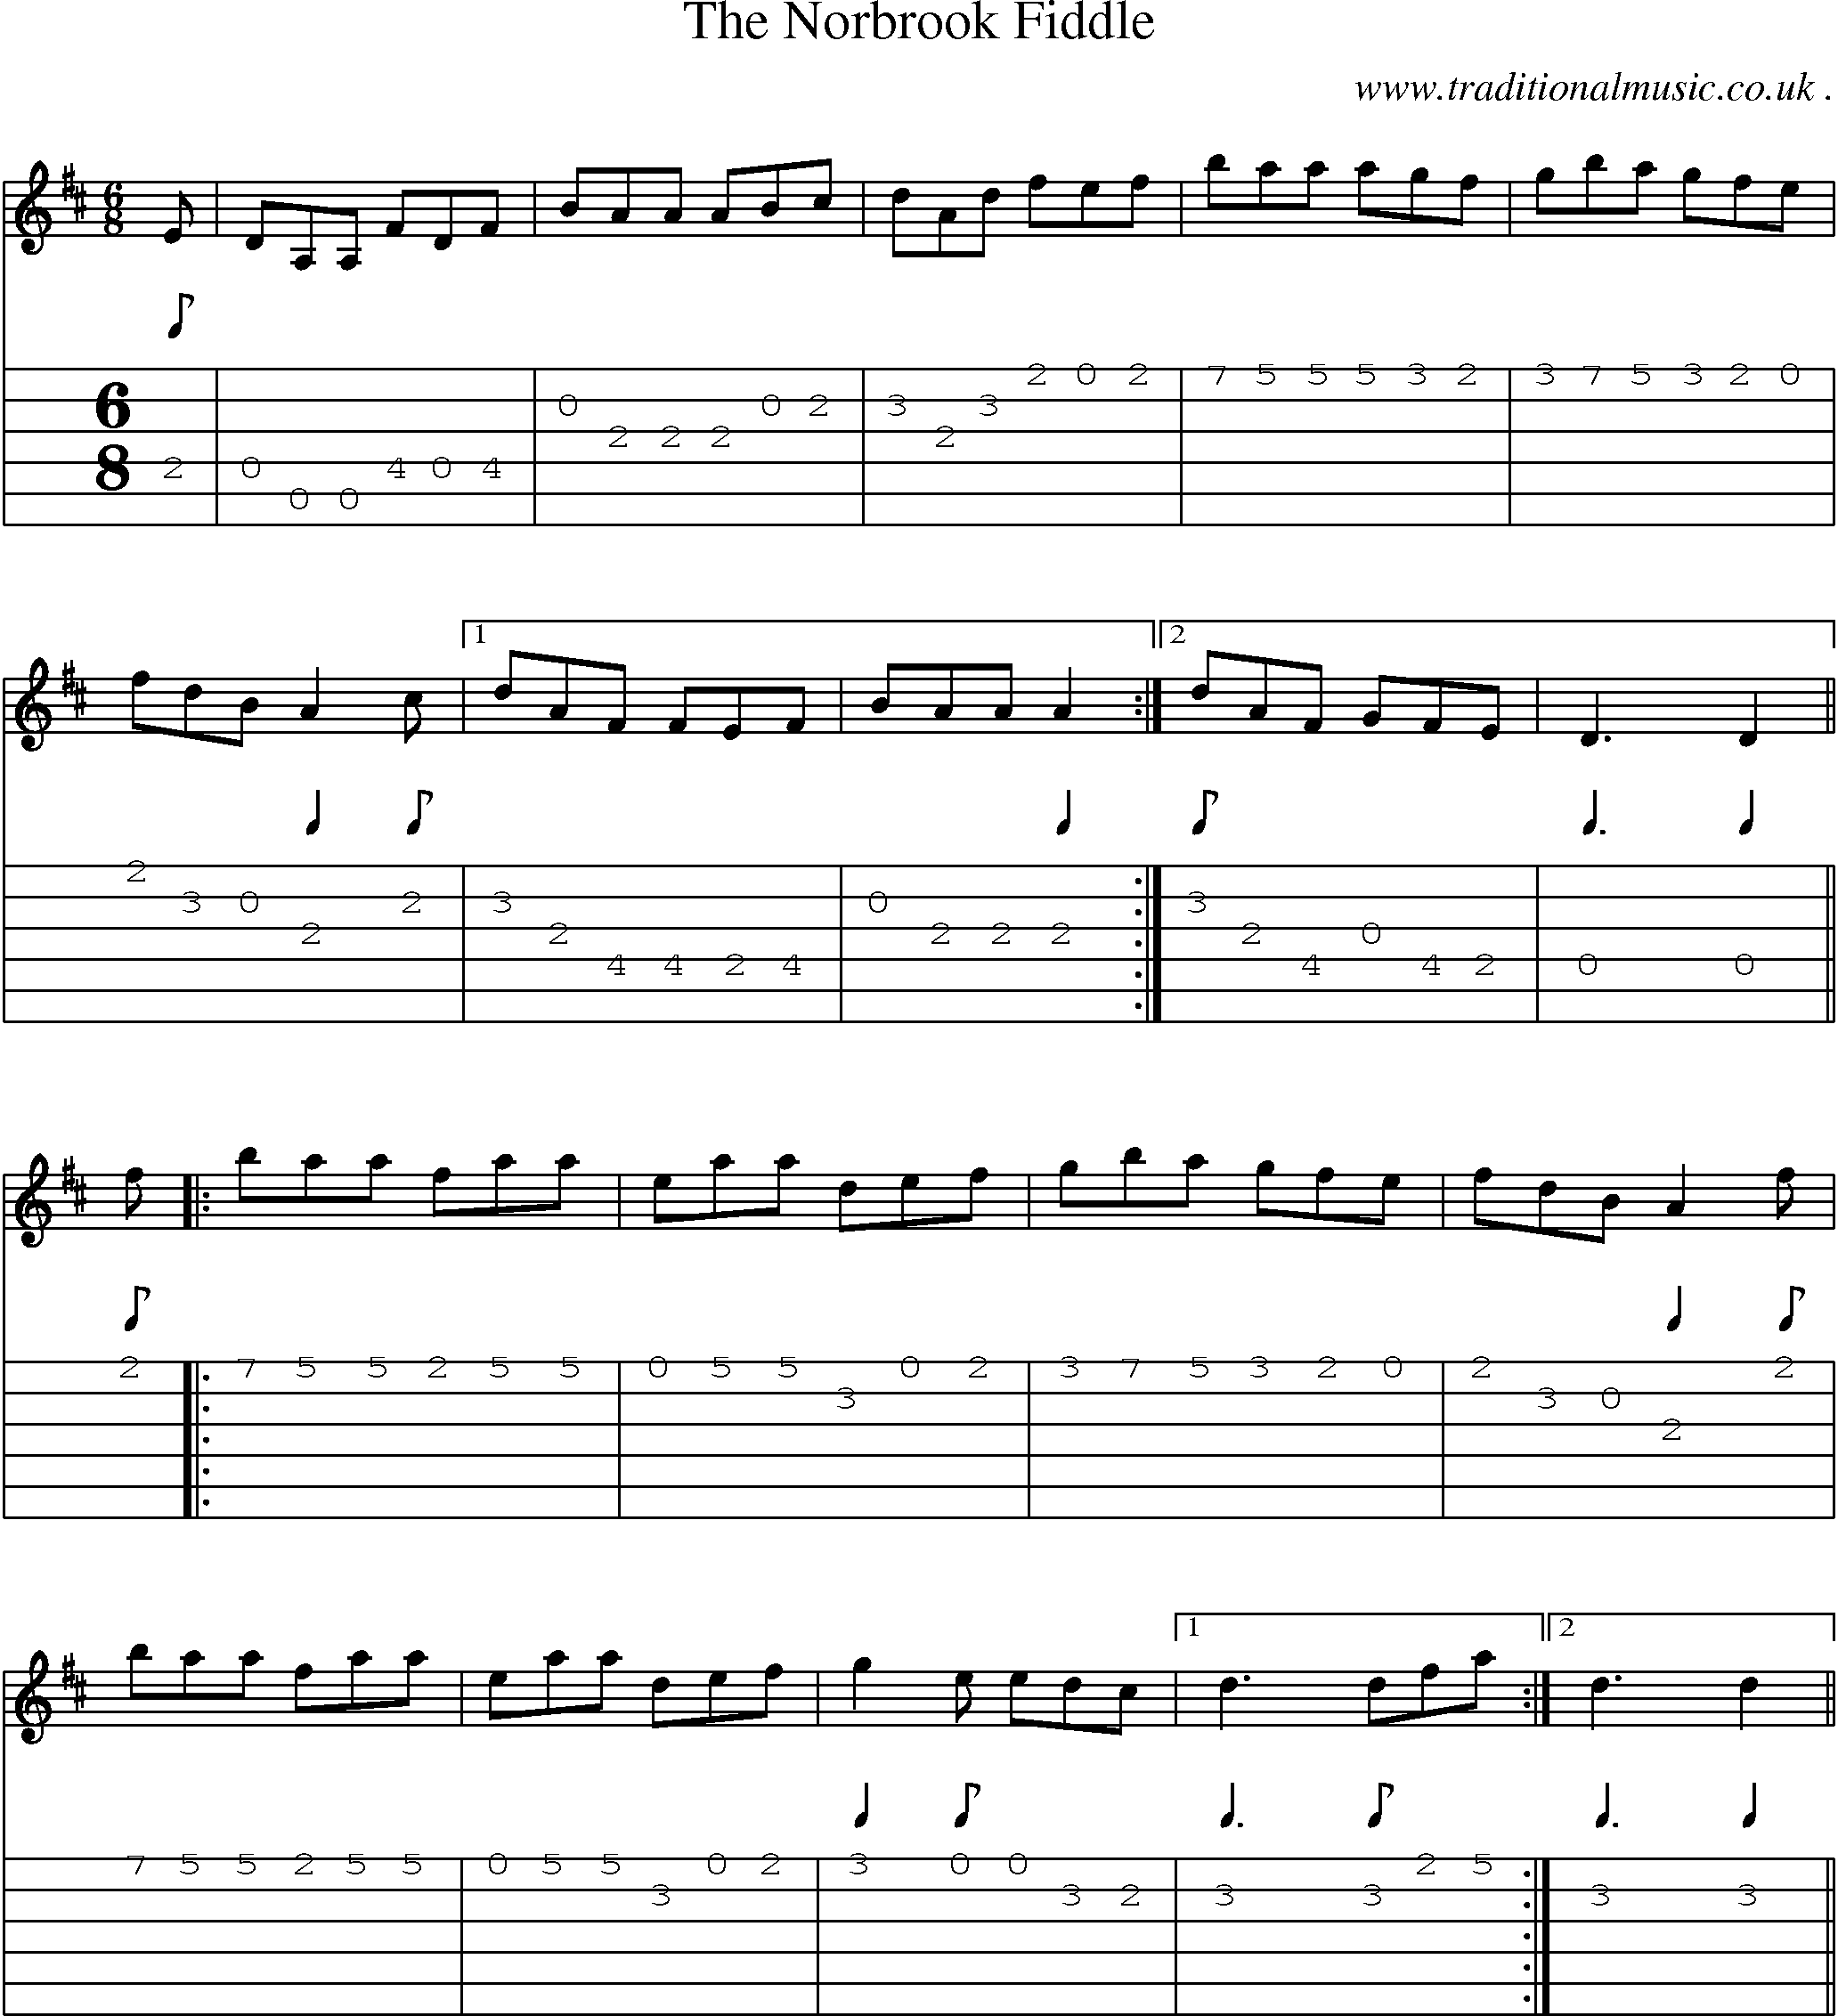 Sheet-Music and Guitar Tabs for The Norbrook Fiddle